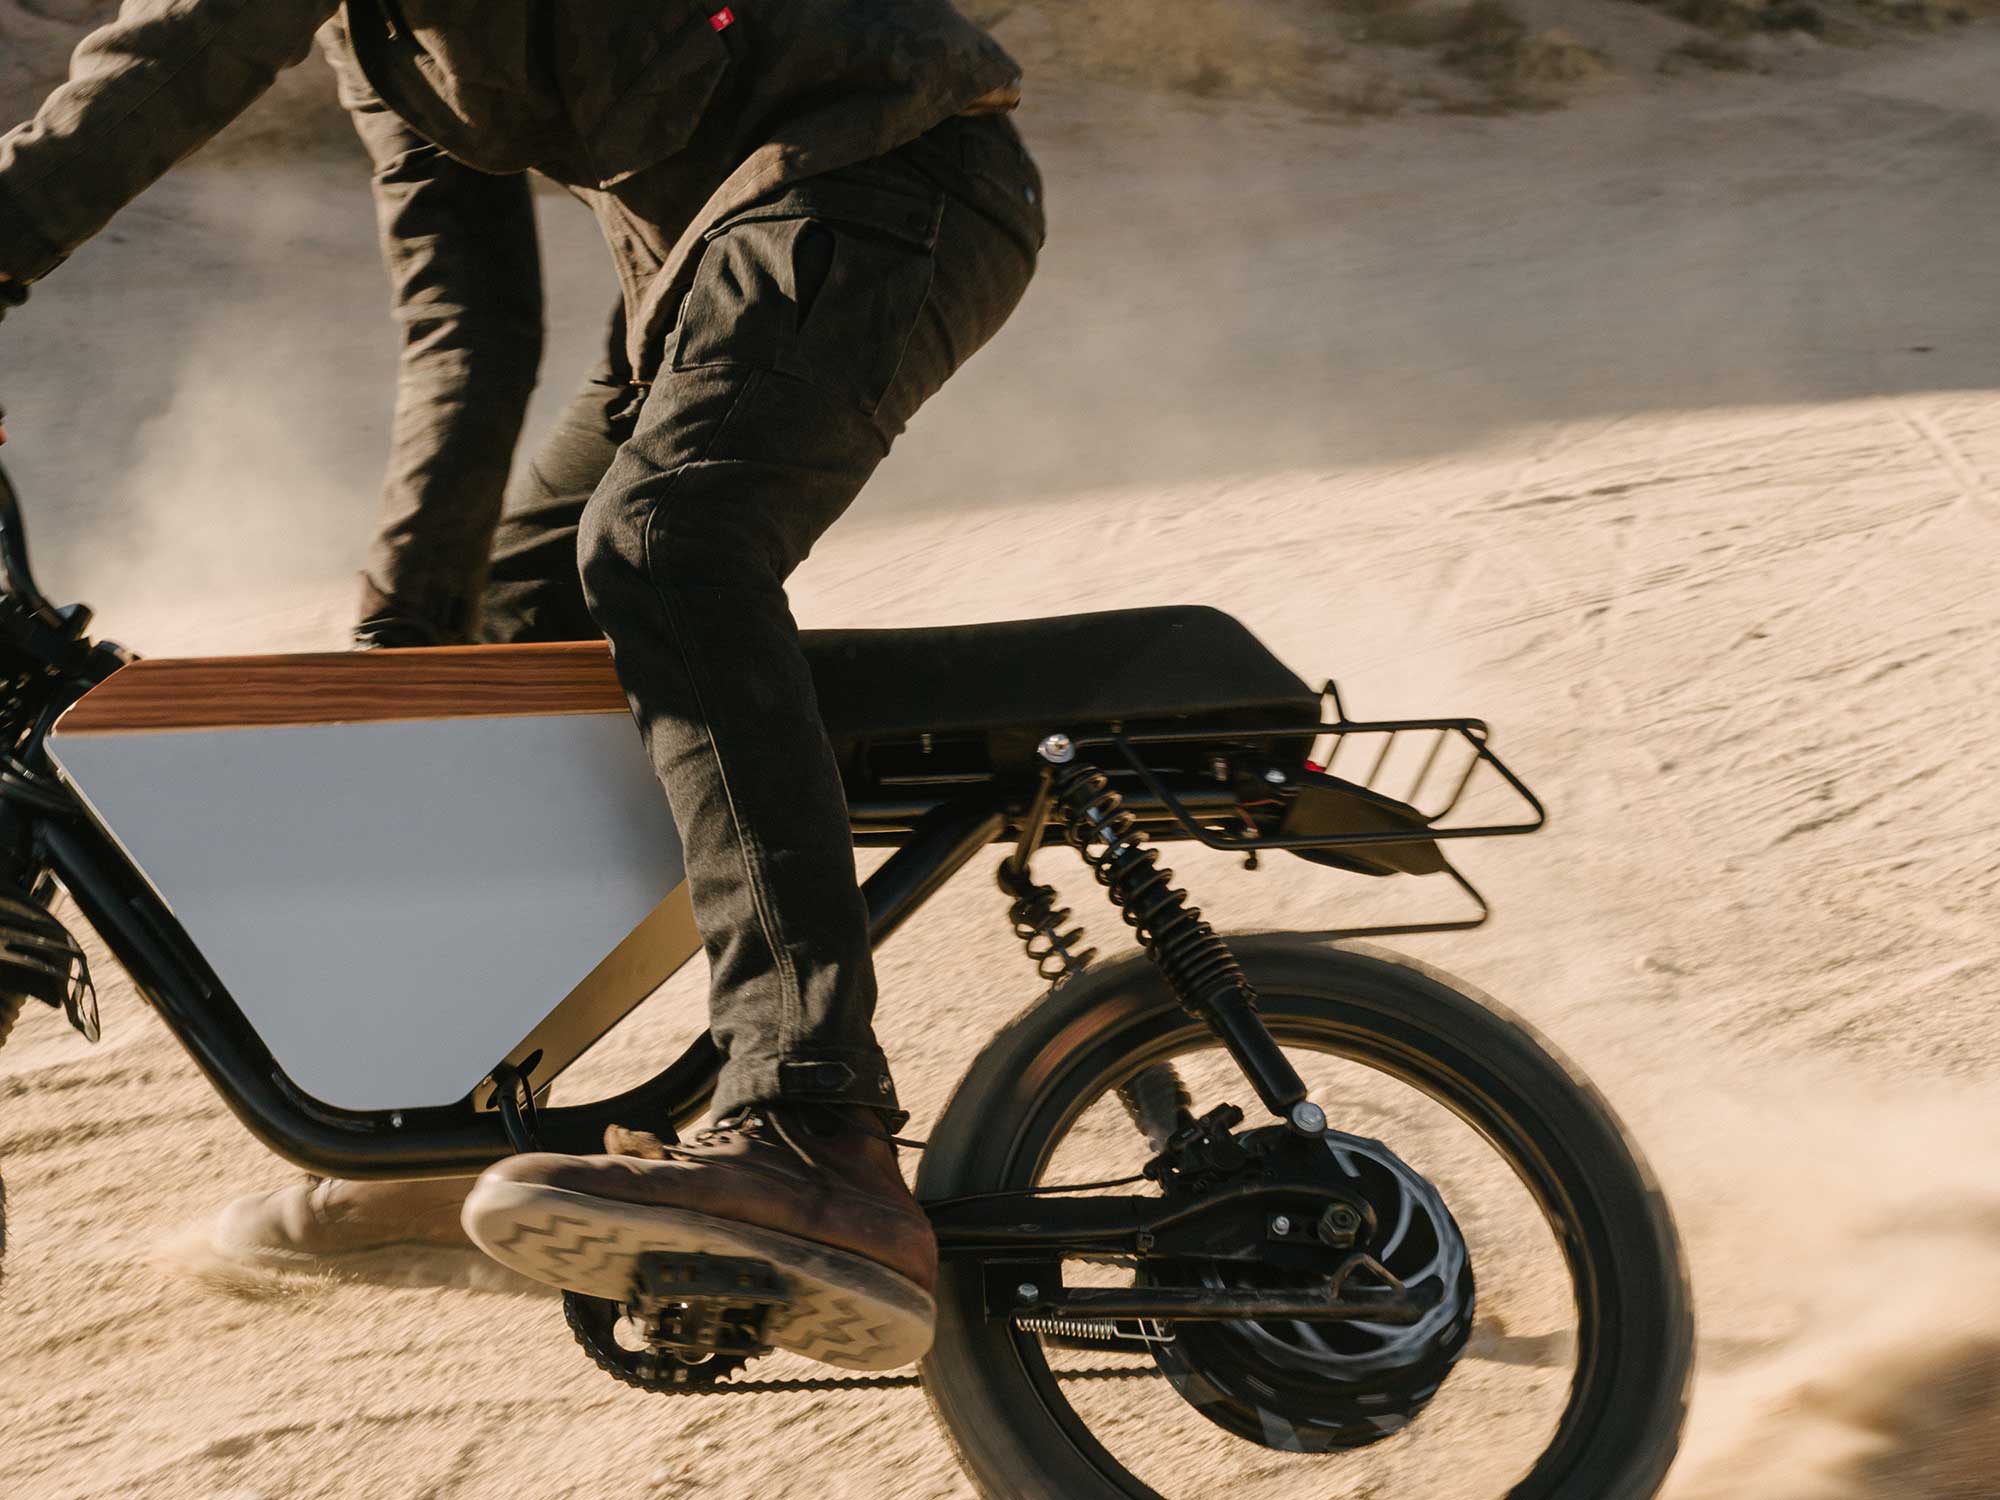 Urban Rider - Pando Moto is consistently hitting the nail on the